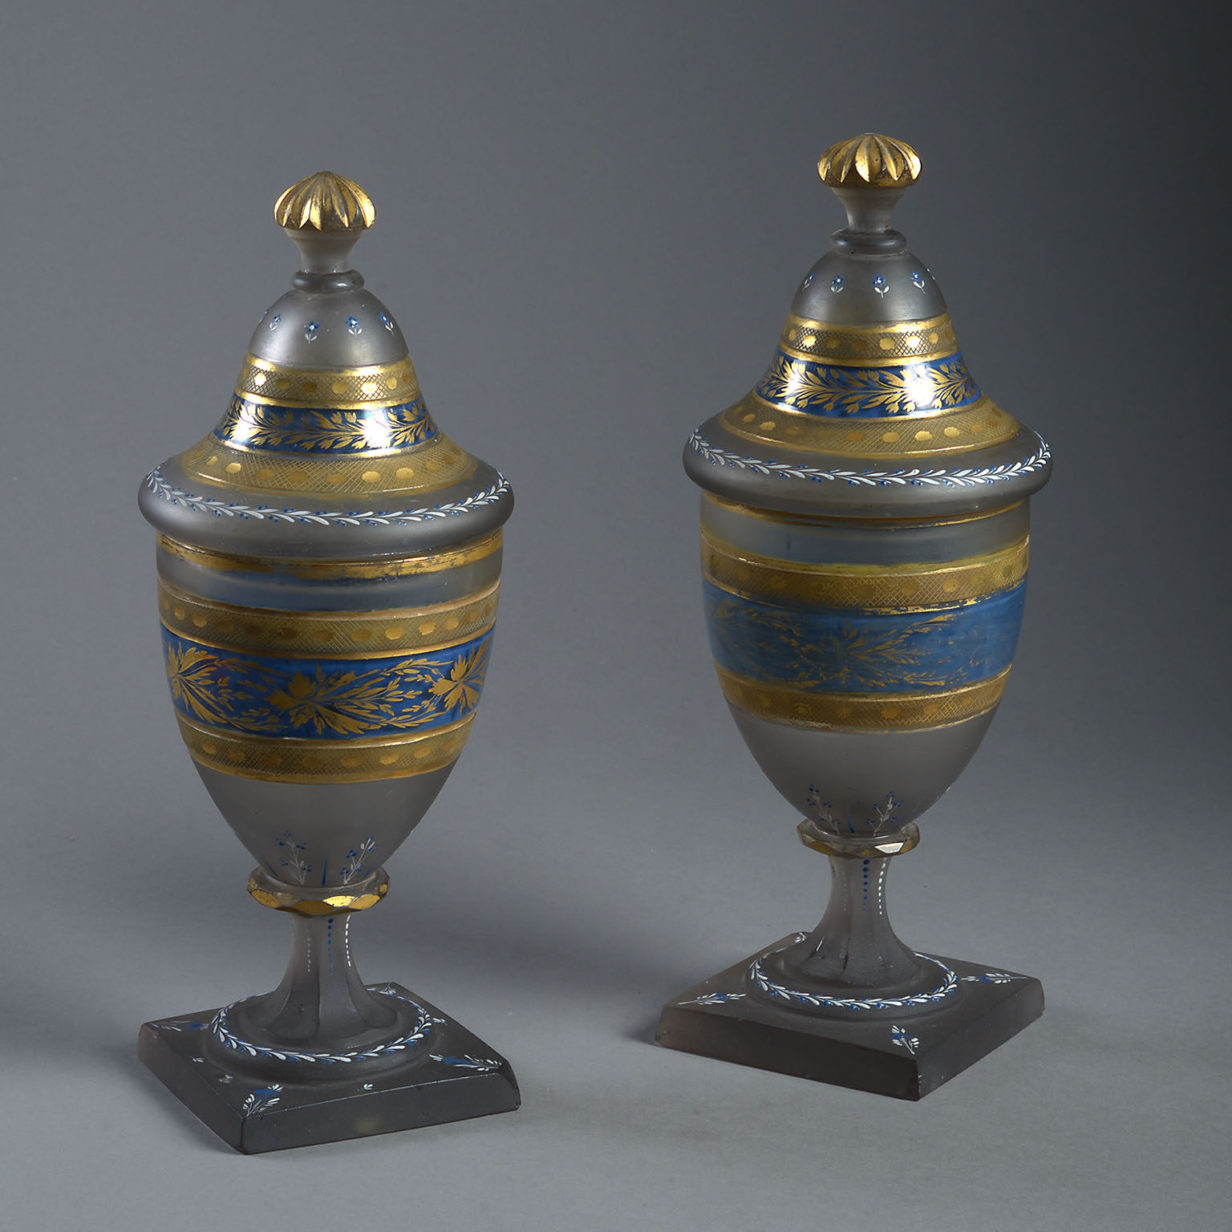 Pair of early 19th century glass lidded vases